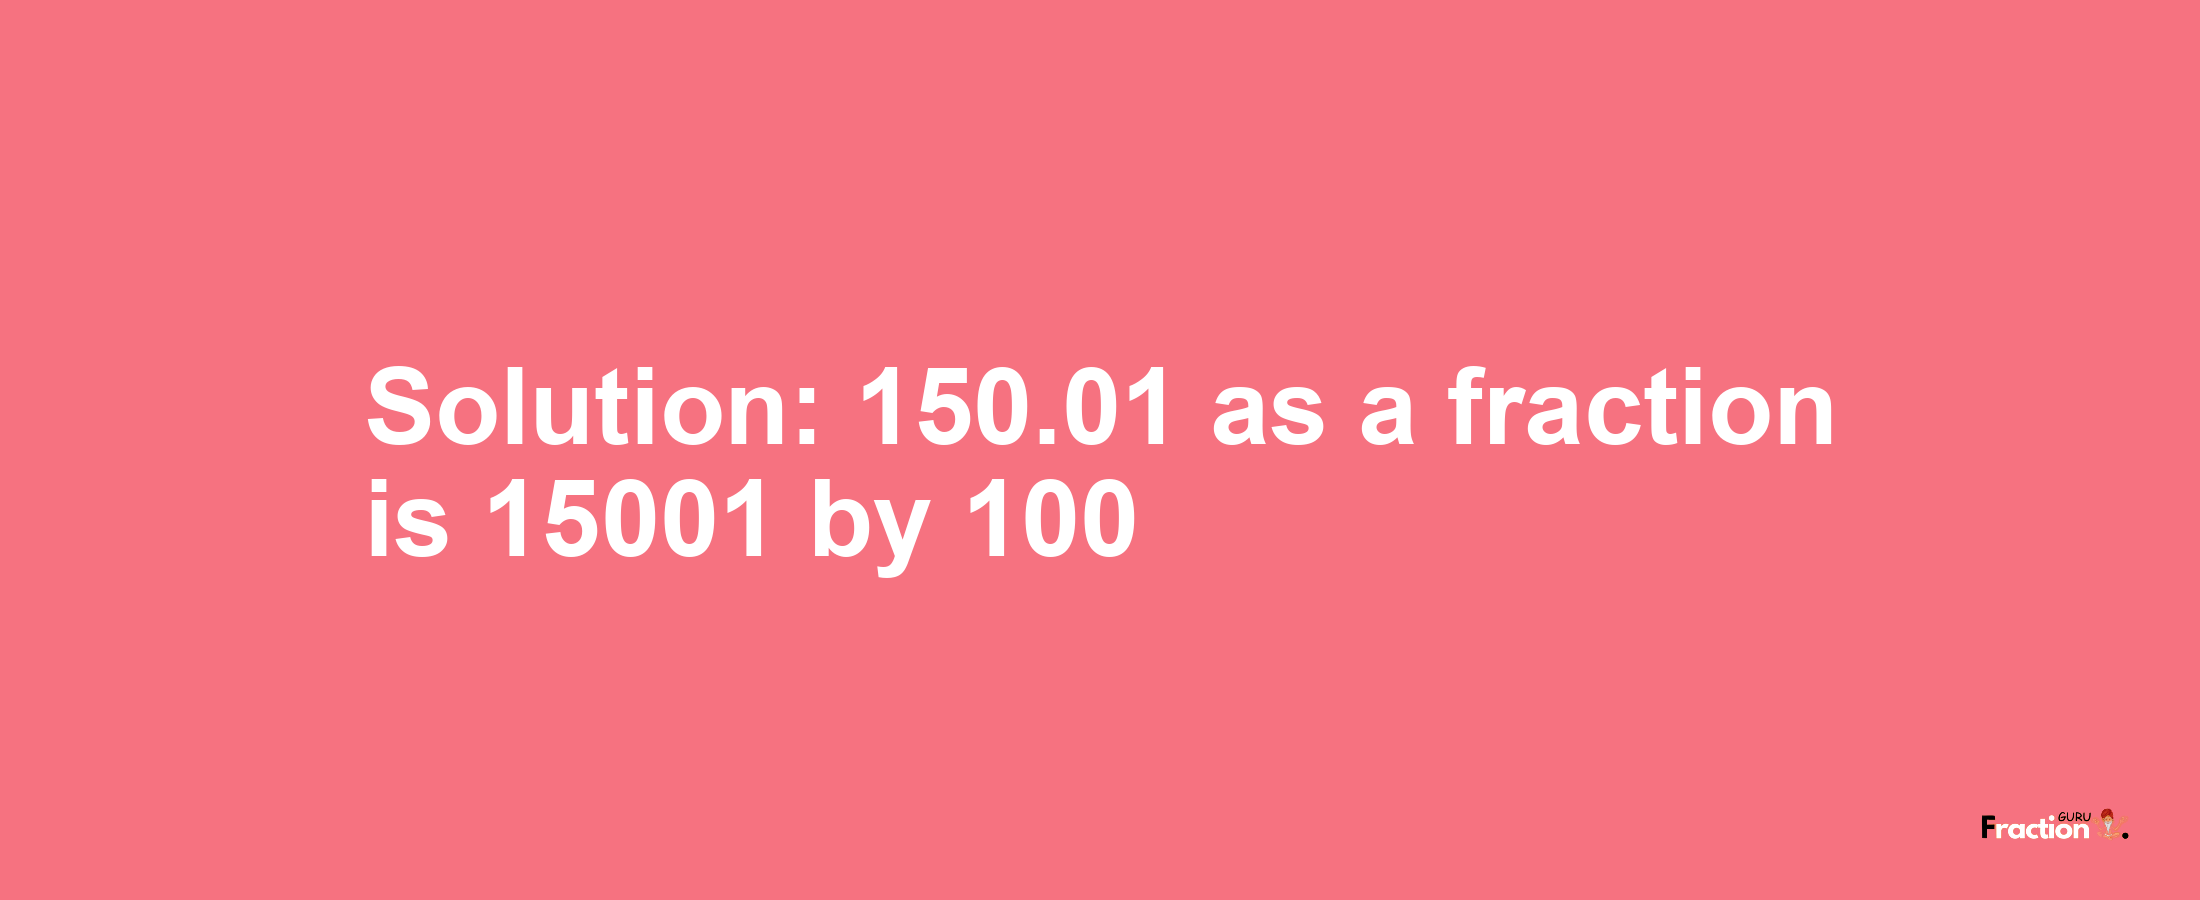 Solution:150.01 as a fraction is 15001/100